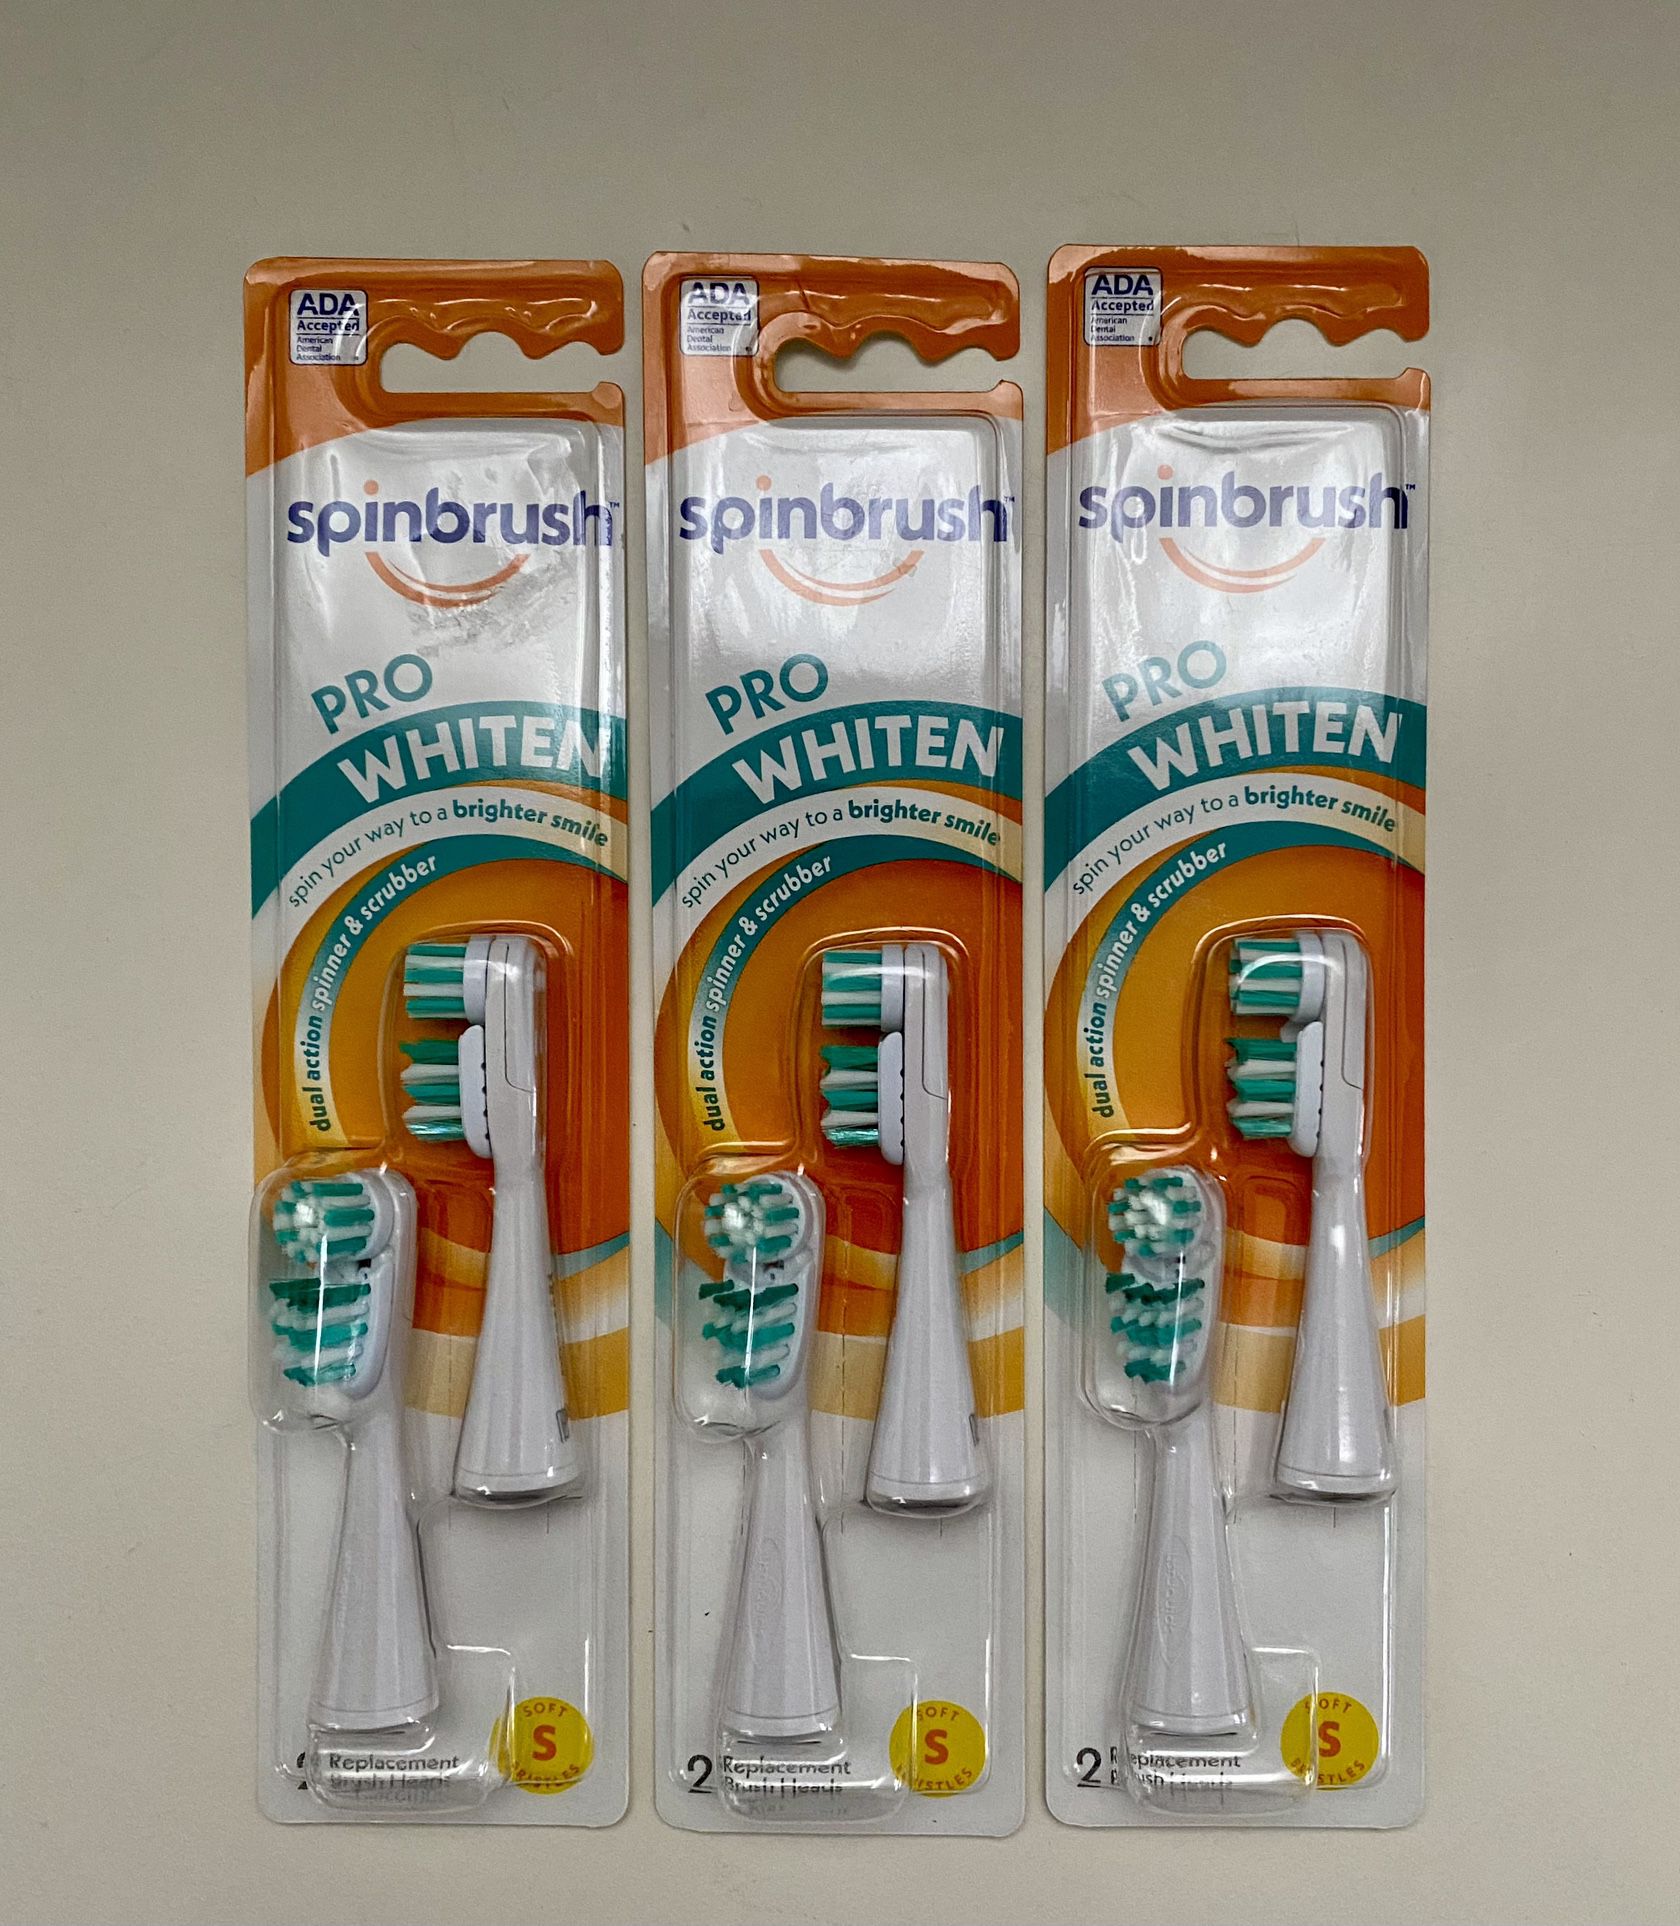 Replacement heads for Crest Spinbrush